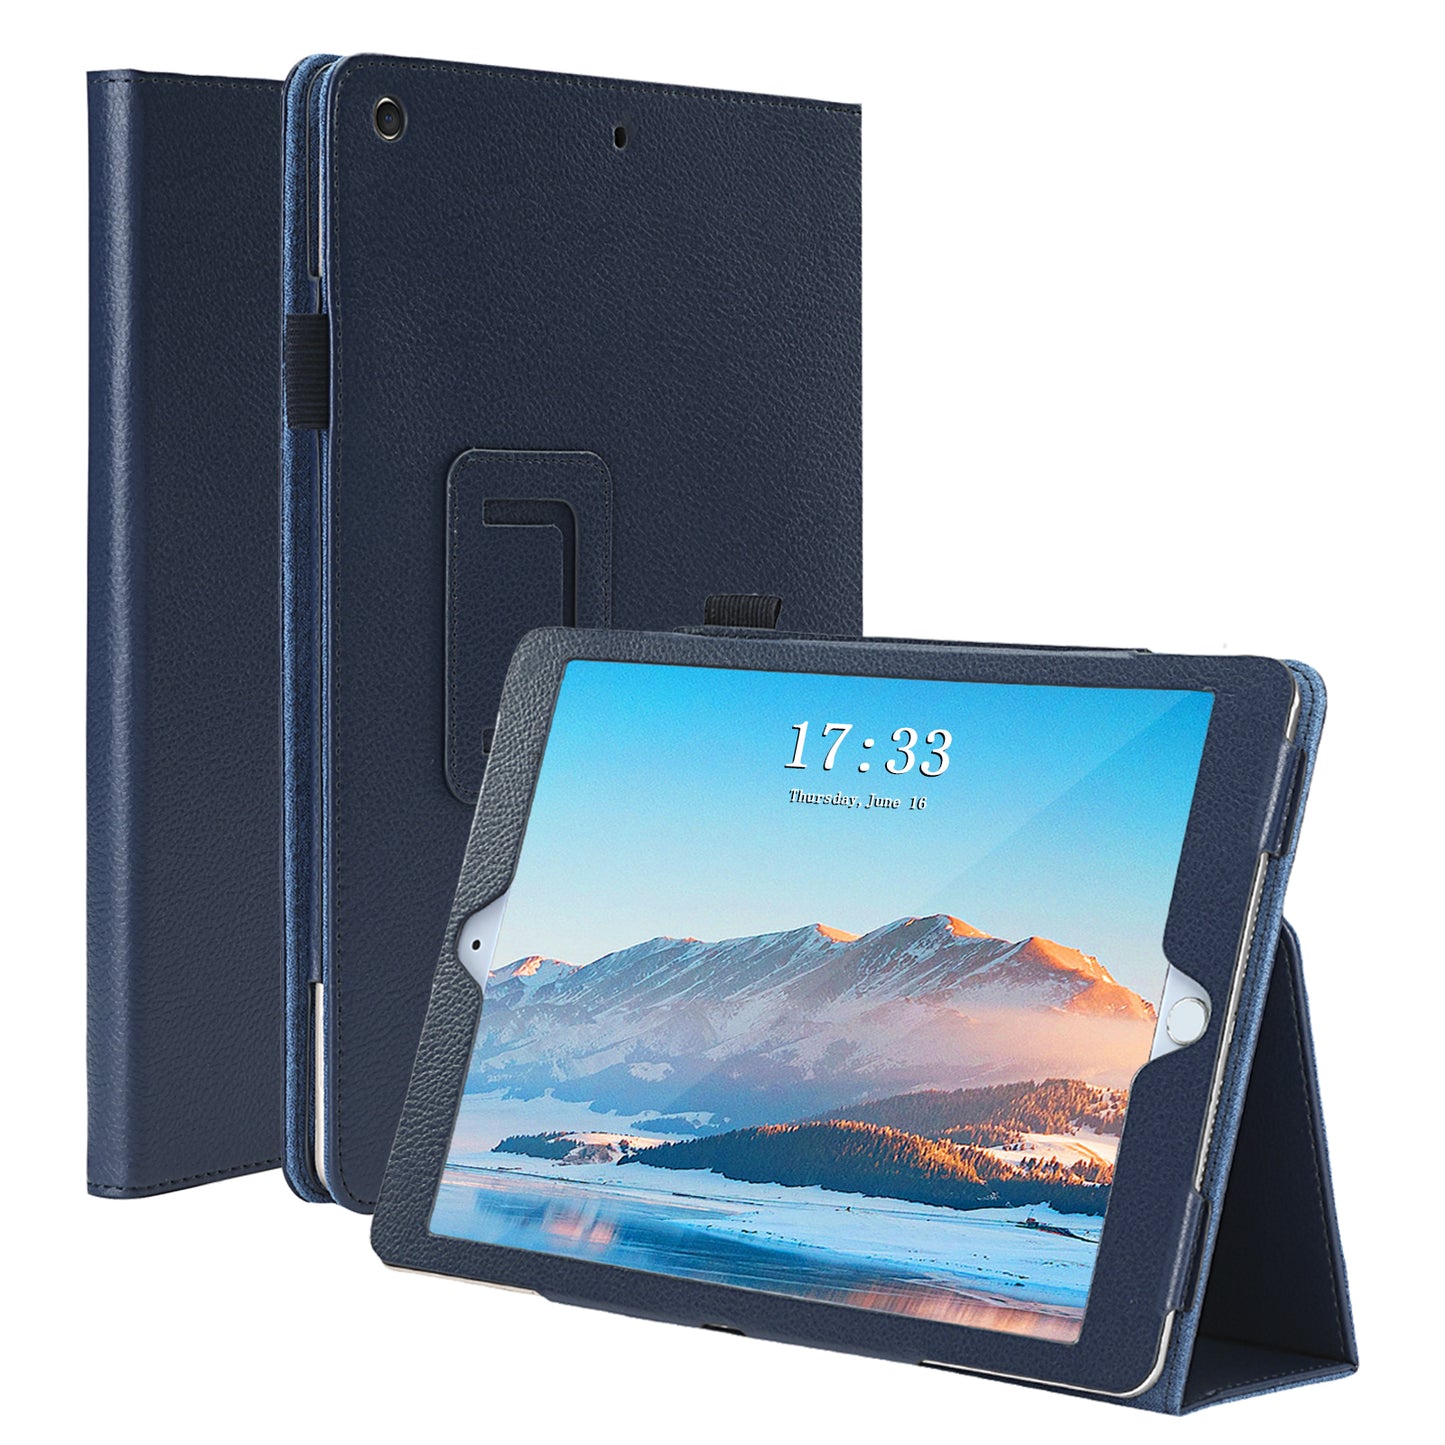 FANSONG iPad Case Mini 1 2 3, Cover for iPad 7.9 inch Generation Magnetic Closure PU Leather Smart Cover Flip Shockproof Slim Pencil Holder Bifold Stand Features for Apple iPad Mini 1 2nd 3rd